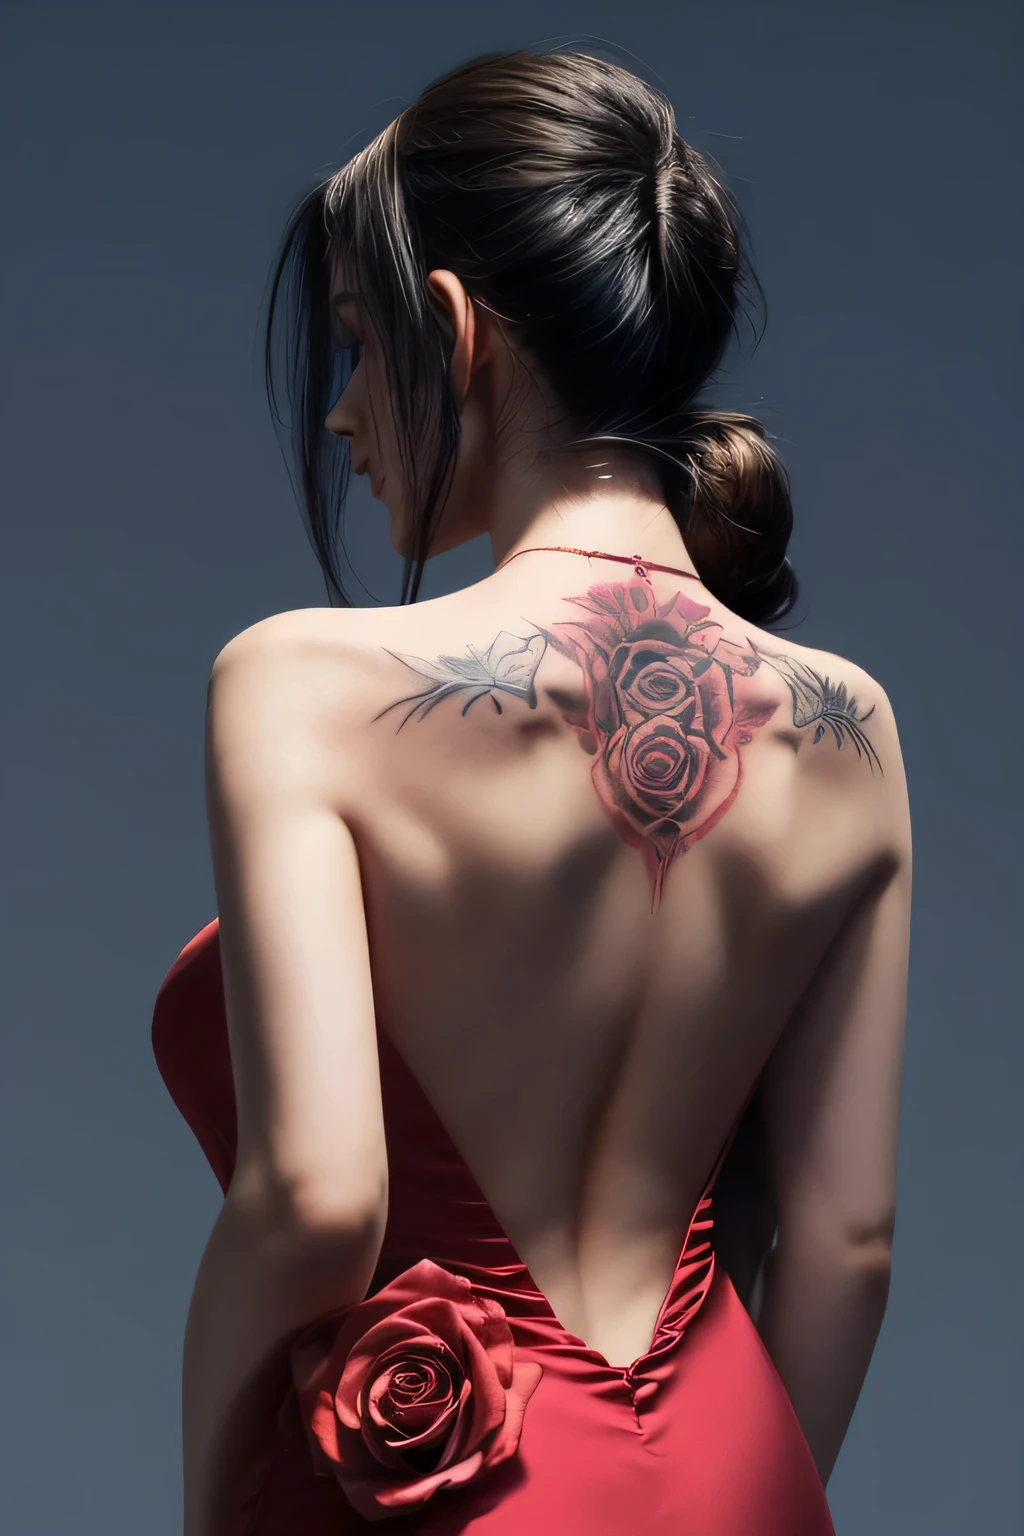 Woman's back view in a halter neck dress has a single rose tattooed on her back